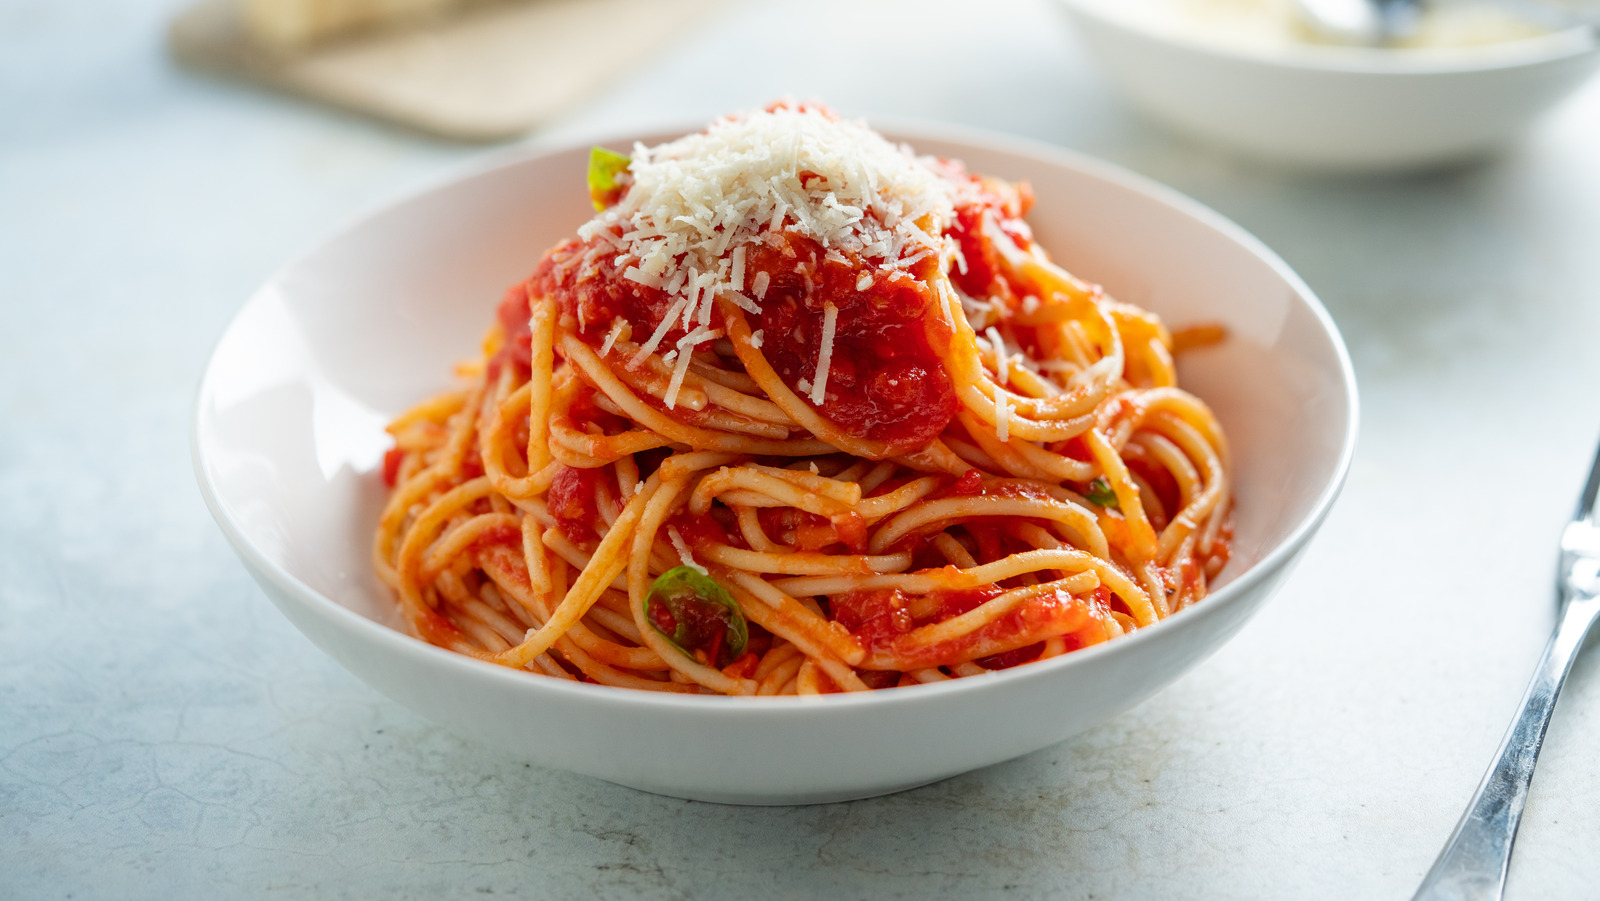 https://www.thedailymeal.com/img/gallery/why-you-shouldnt-cook-spaghetti-in-a-small-pot/l-intro-1671061248.jpg